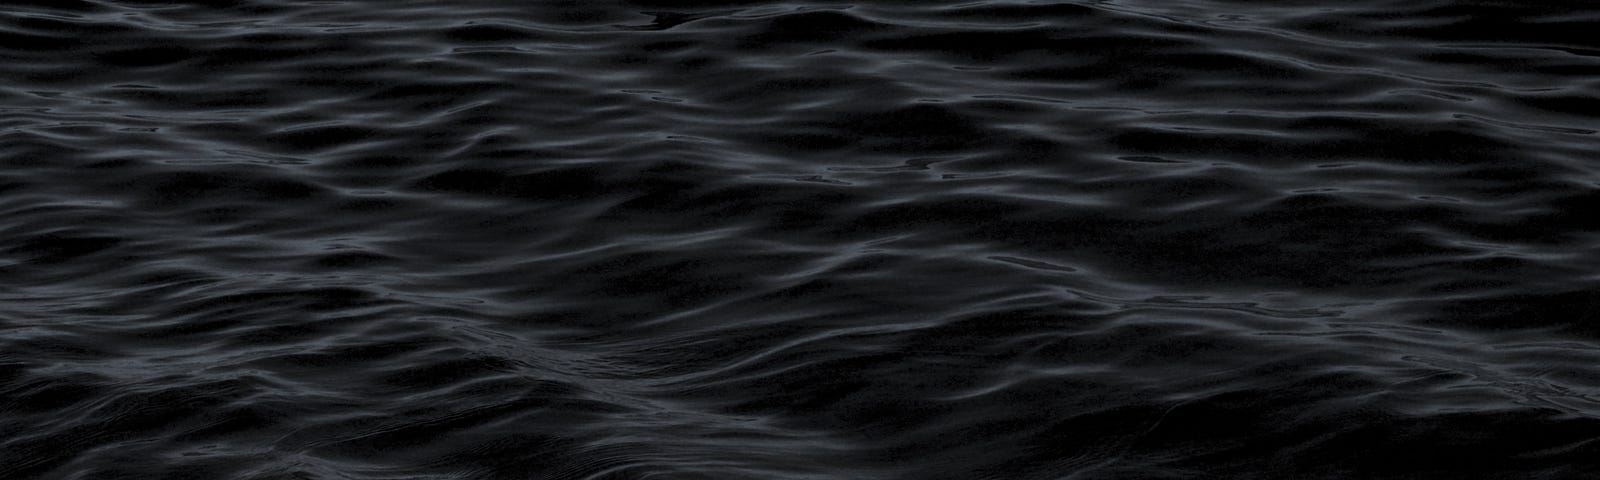 A large, dark body of water